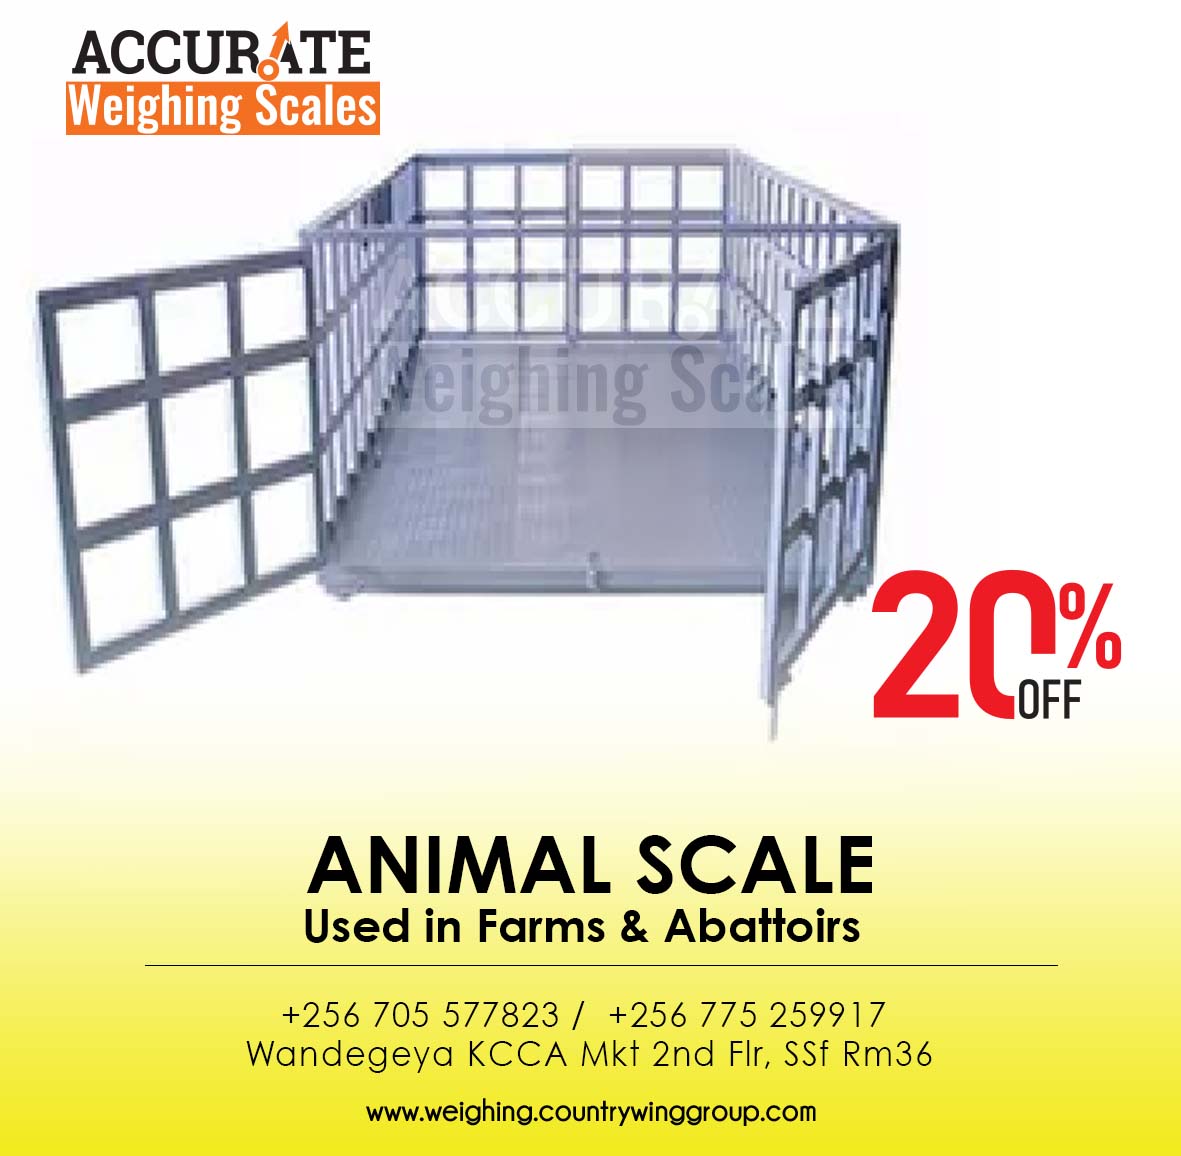 How much is a digital livestock animal weighing scale in Kampala